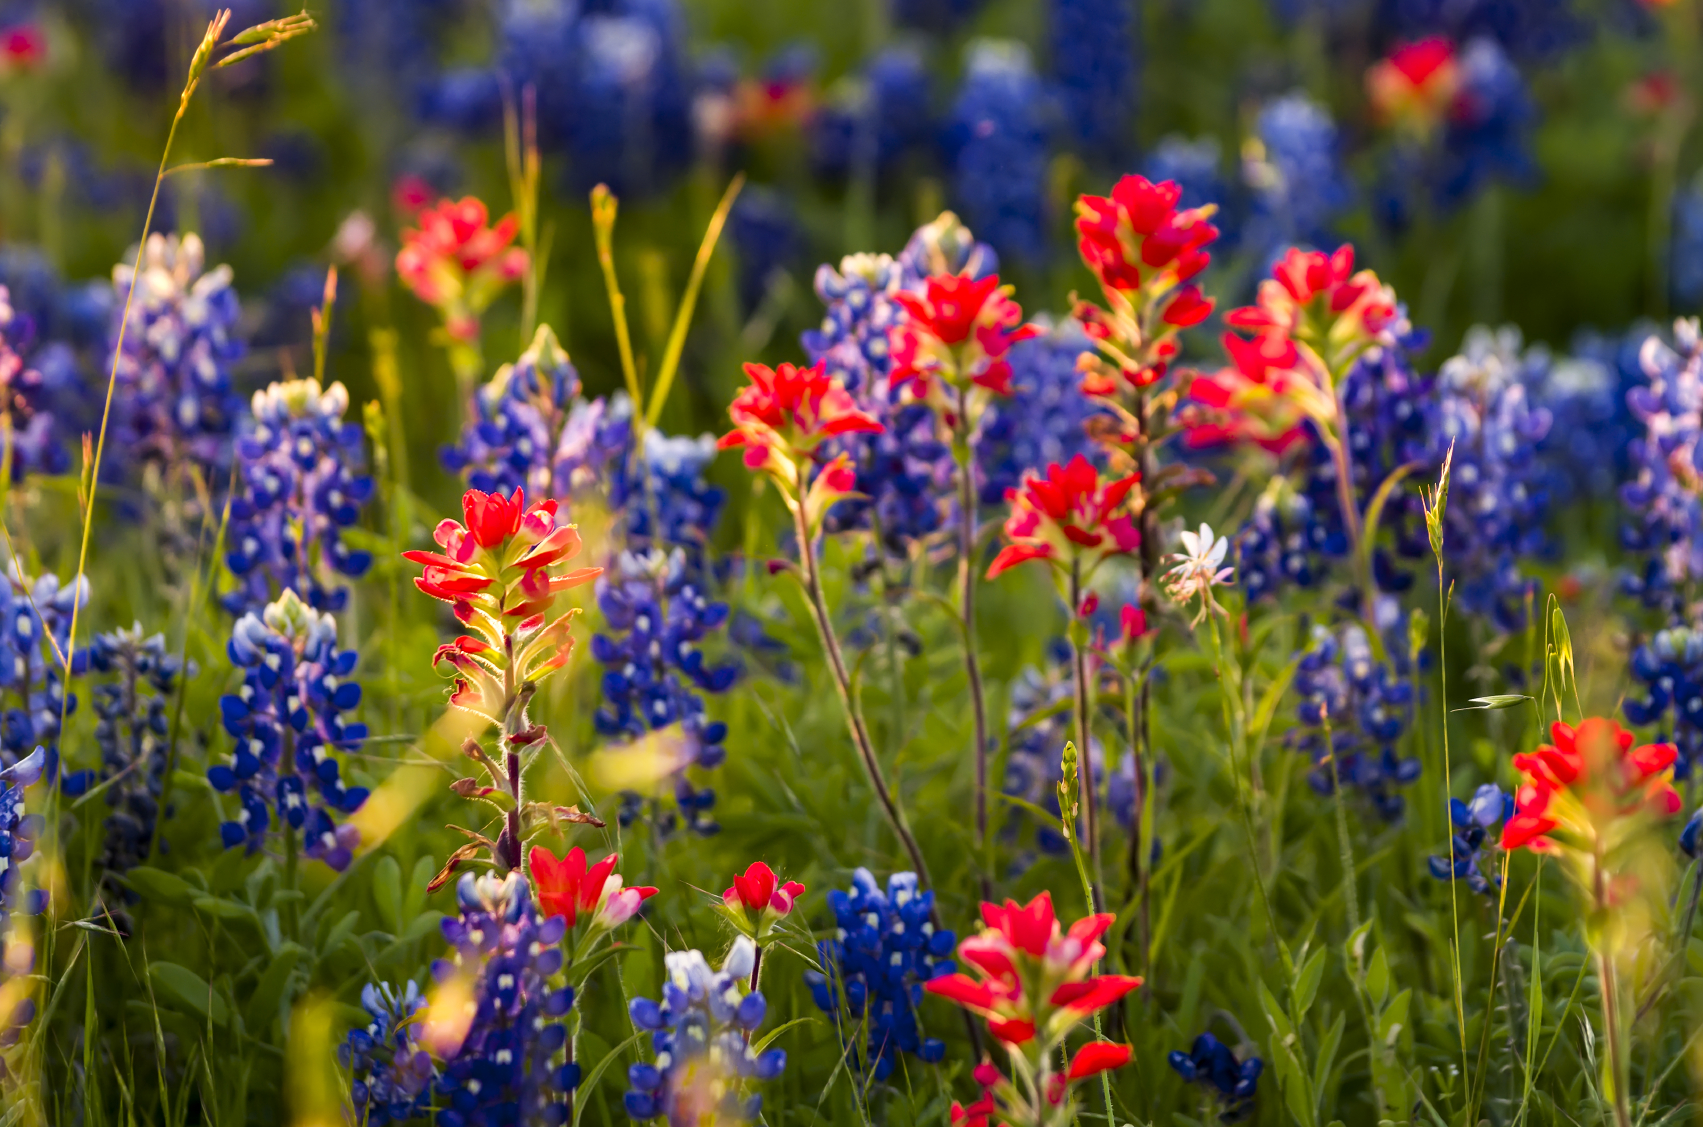 Fort Bend Kicks off Spring with Texas Style!